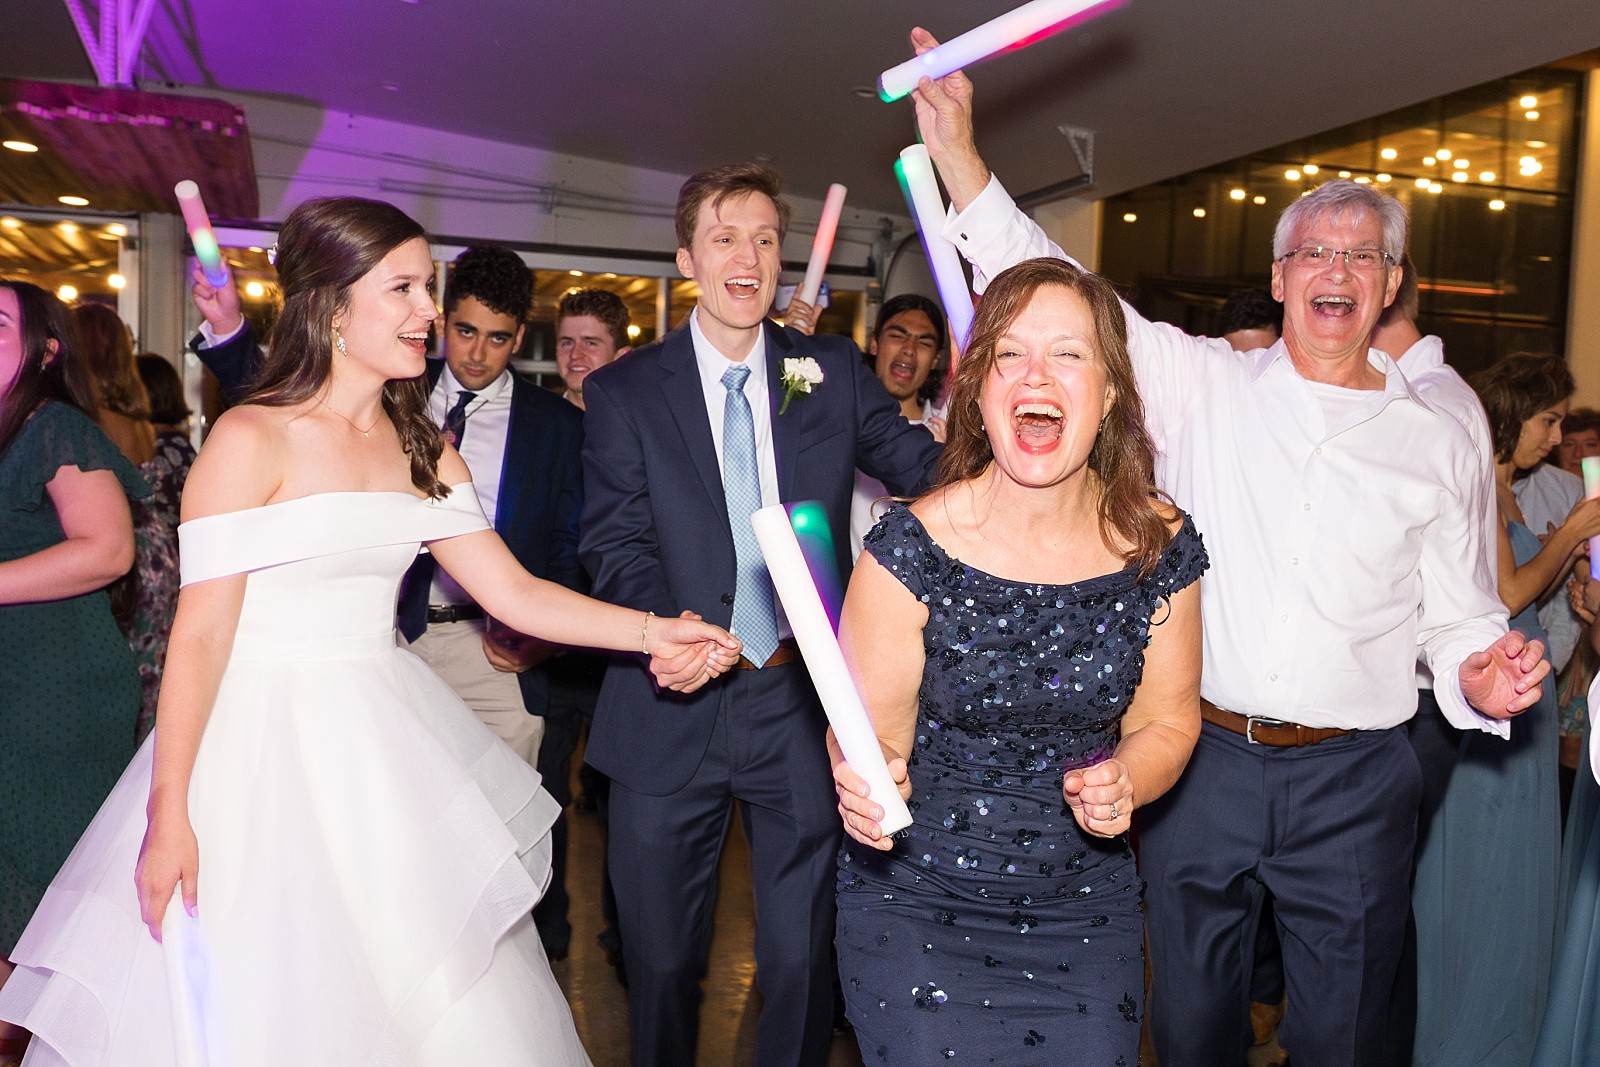 glow sticks at wedding reception  | The Meadows in Raleigh | Raleigh NC Wedding Photographer